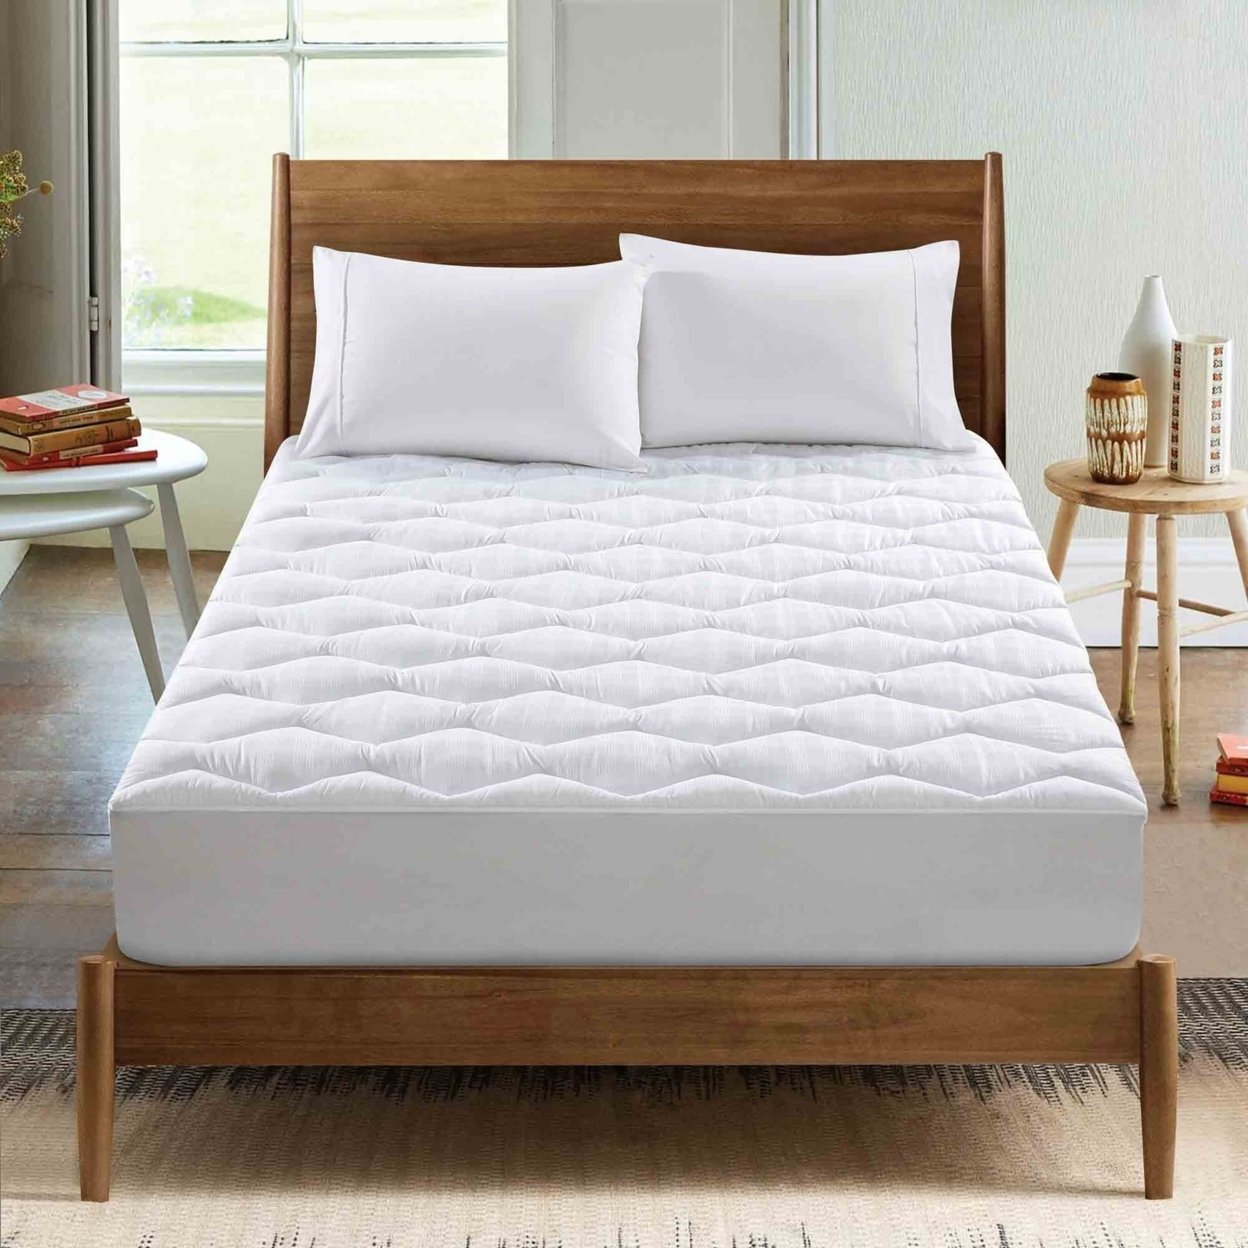 Down Alternative Mattress Pad With 500 Thread Count Cotton Cover, 18 Inch Deep, Soft And Breathable Bedding - Queen, White